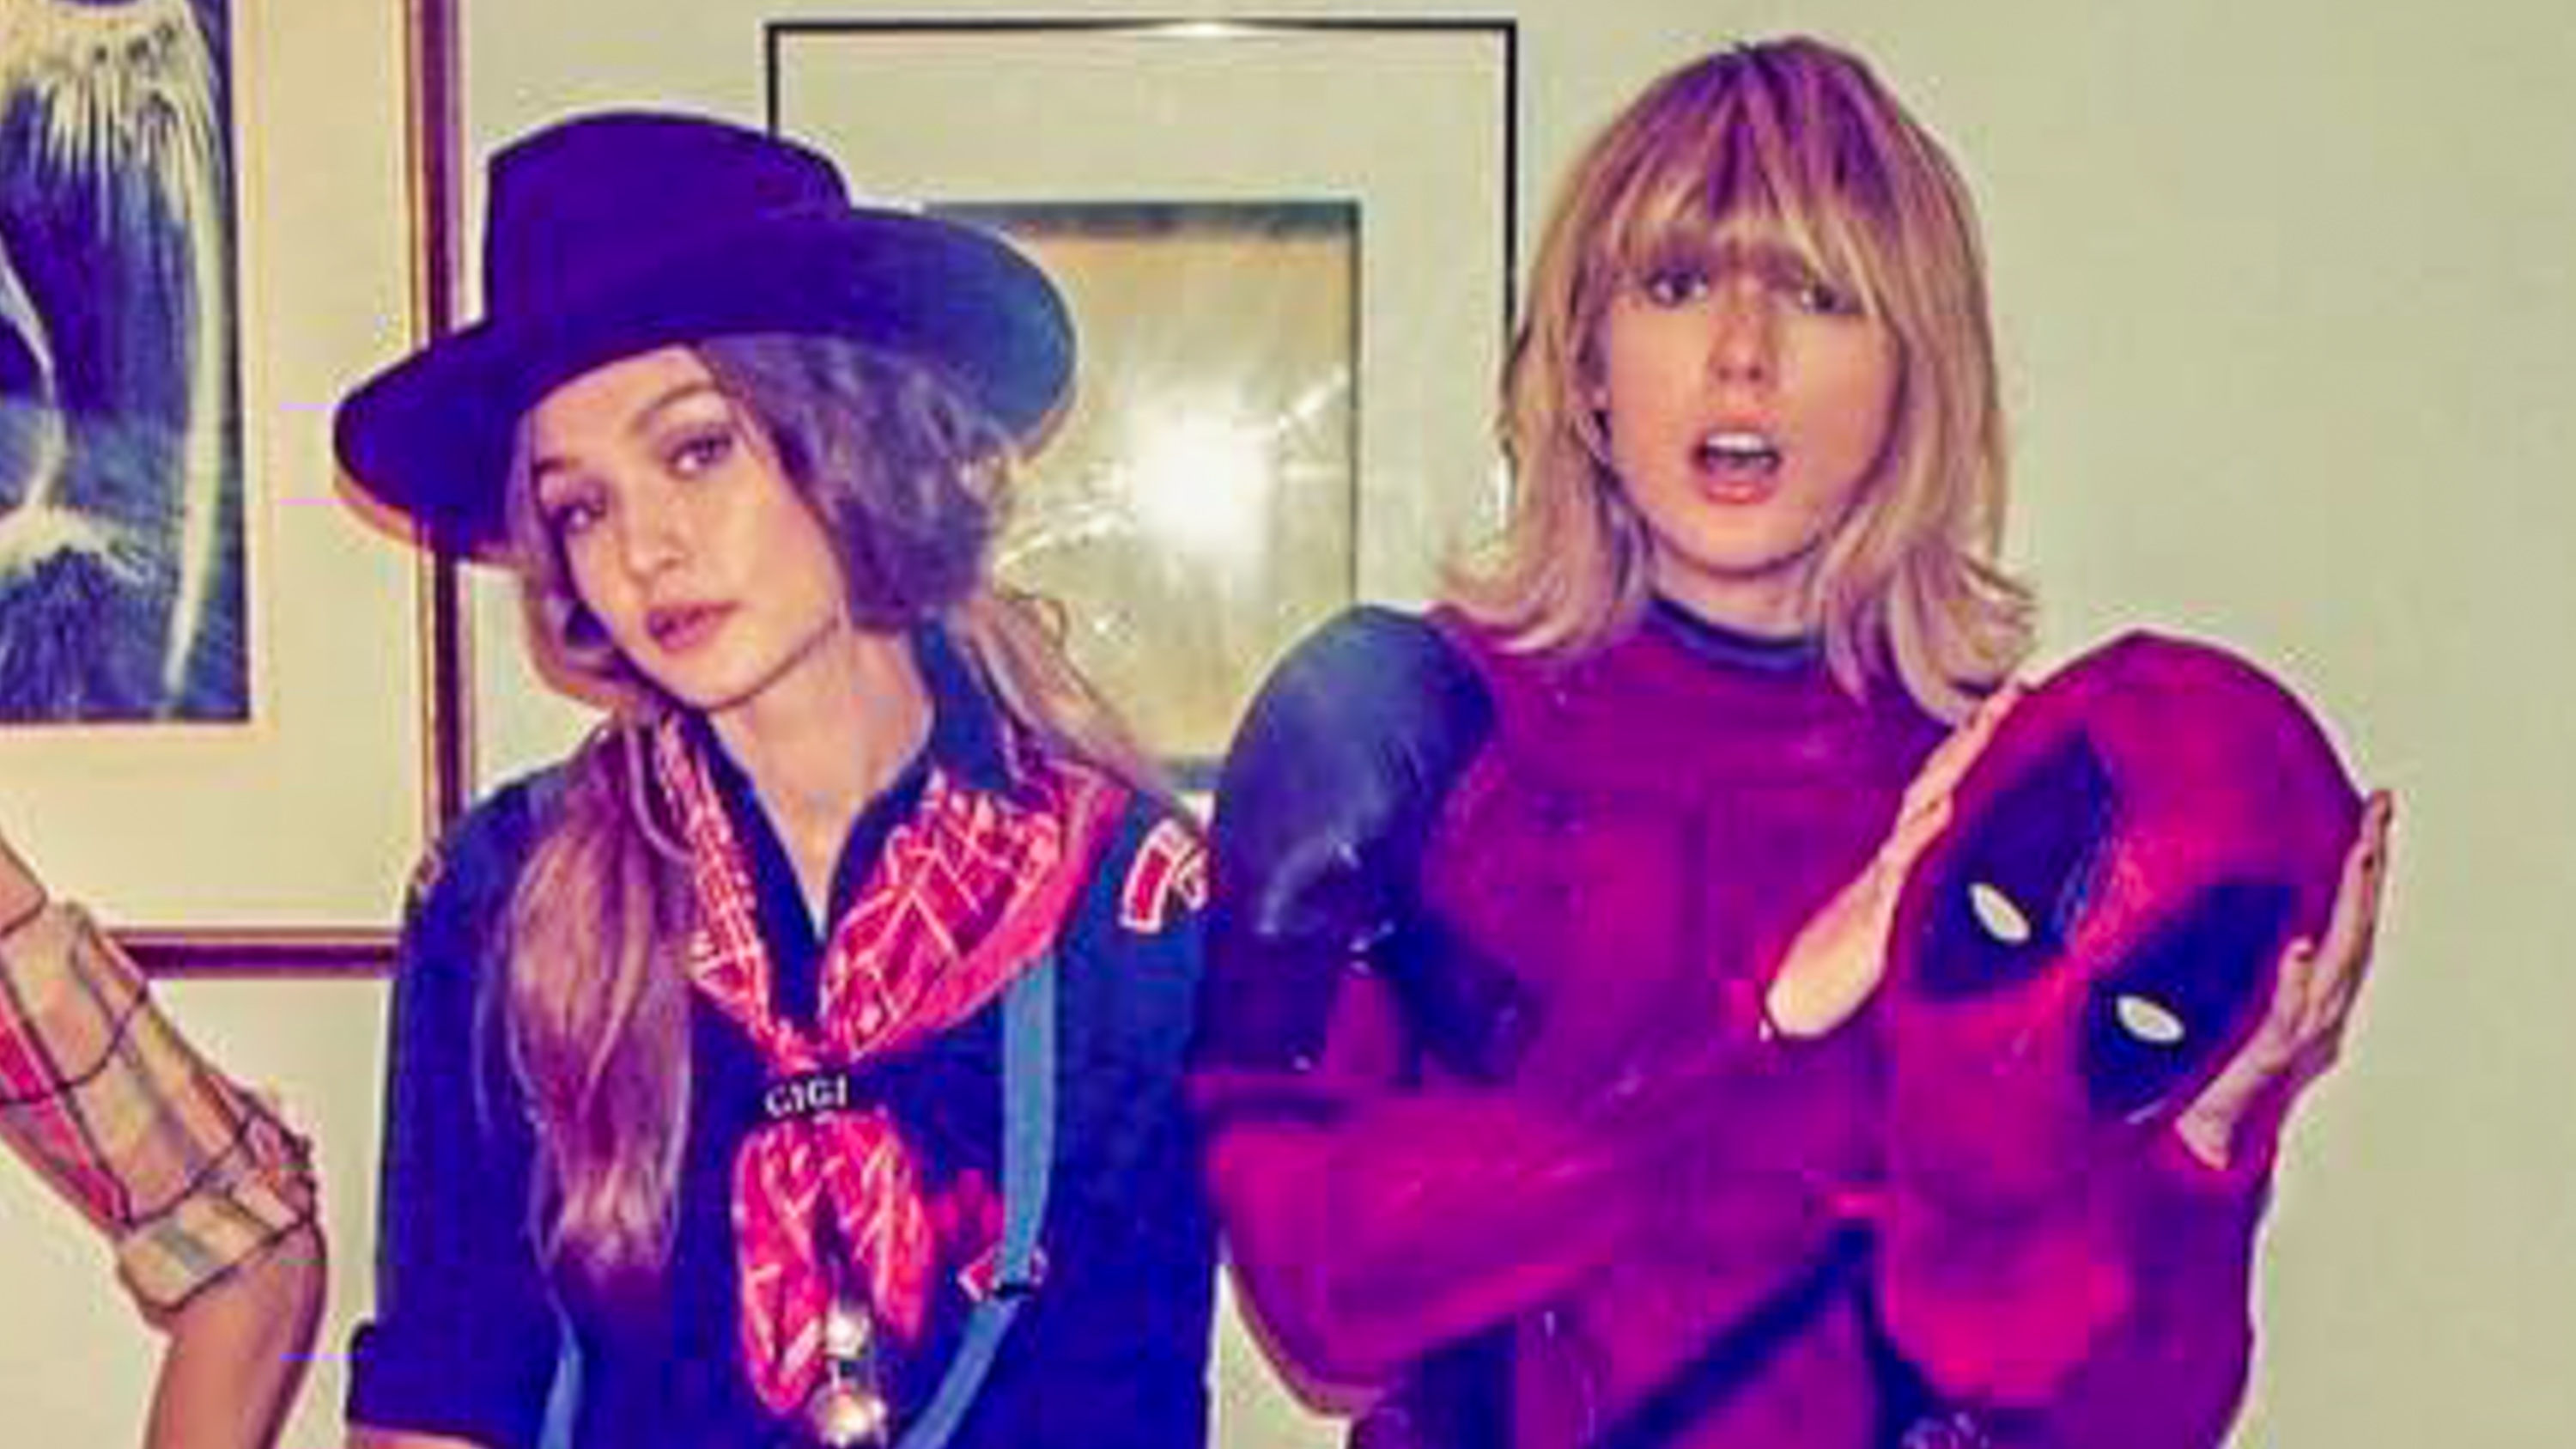 HALLOWEEN 2016. Taylor Swift dressed up as Deadpool and hung out with her squad âÂ including model Gigi Hadid â to celebrate Halloween. Screengrab from Instagram/taylorswift 